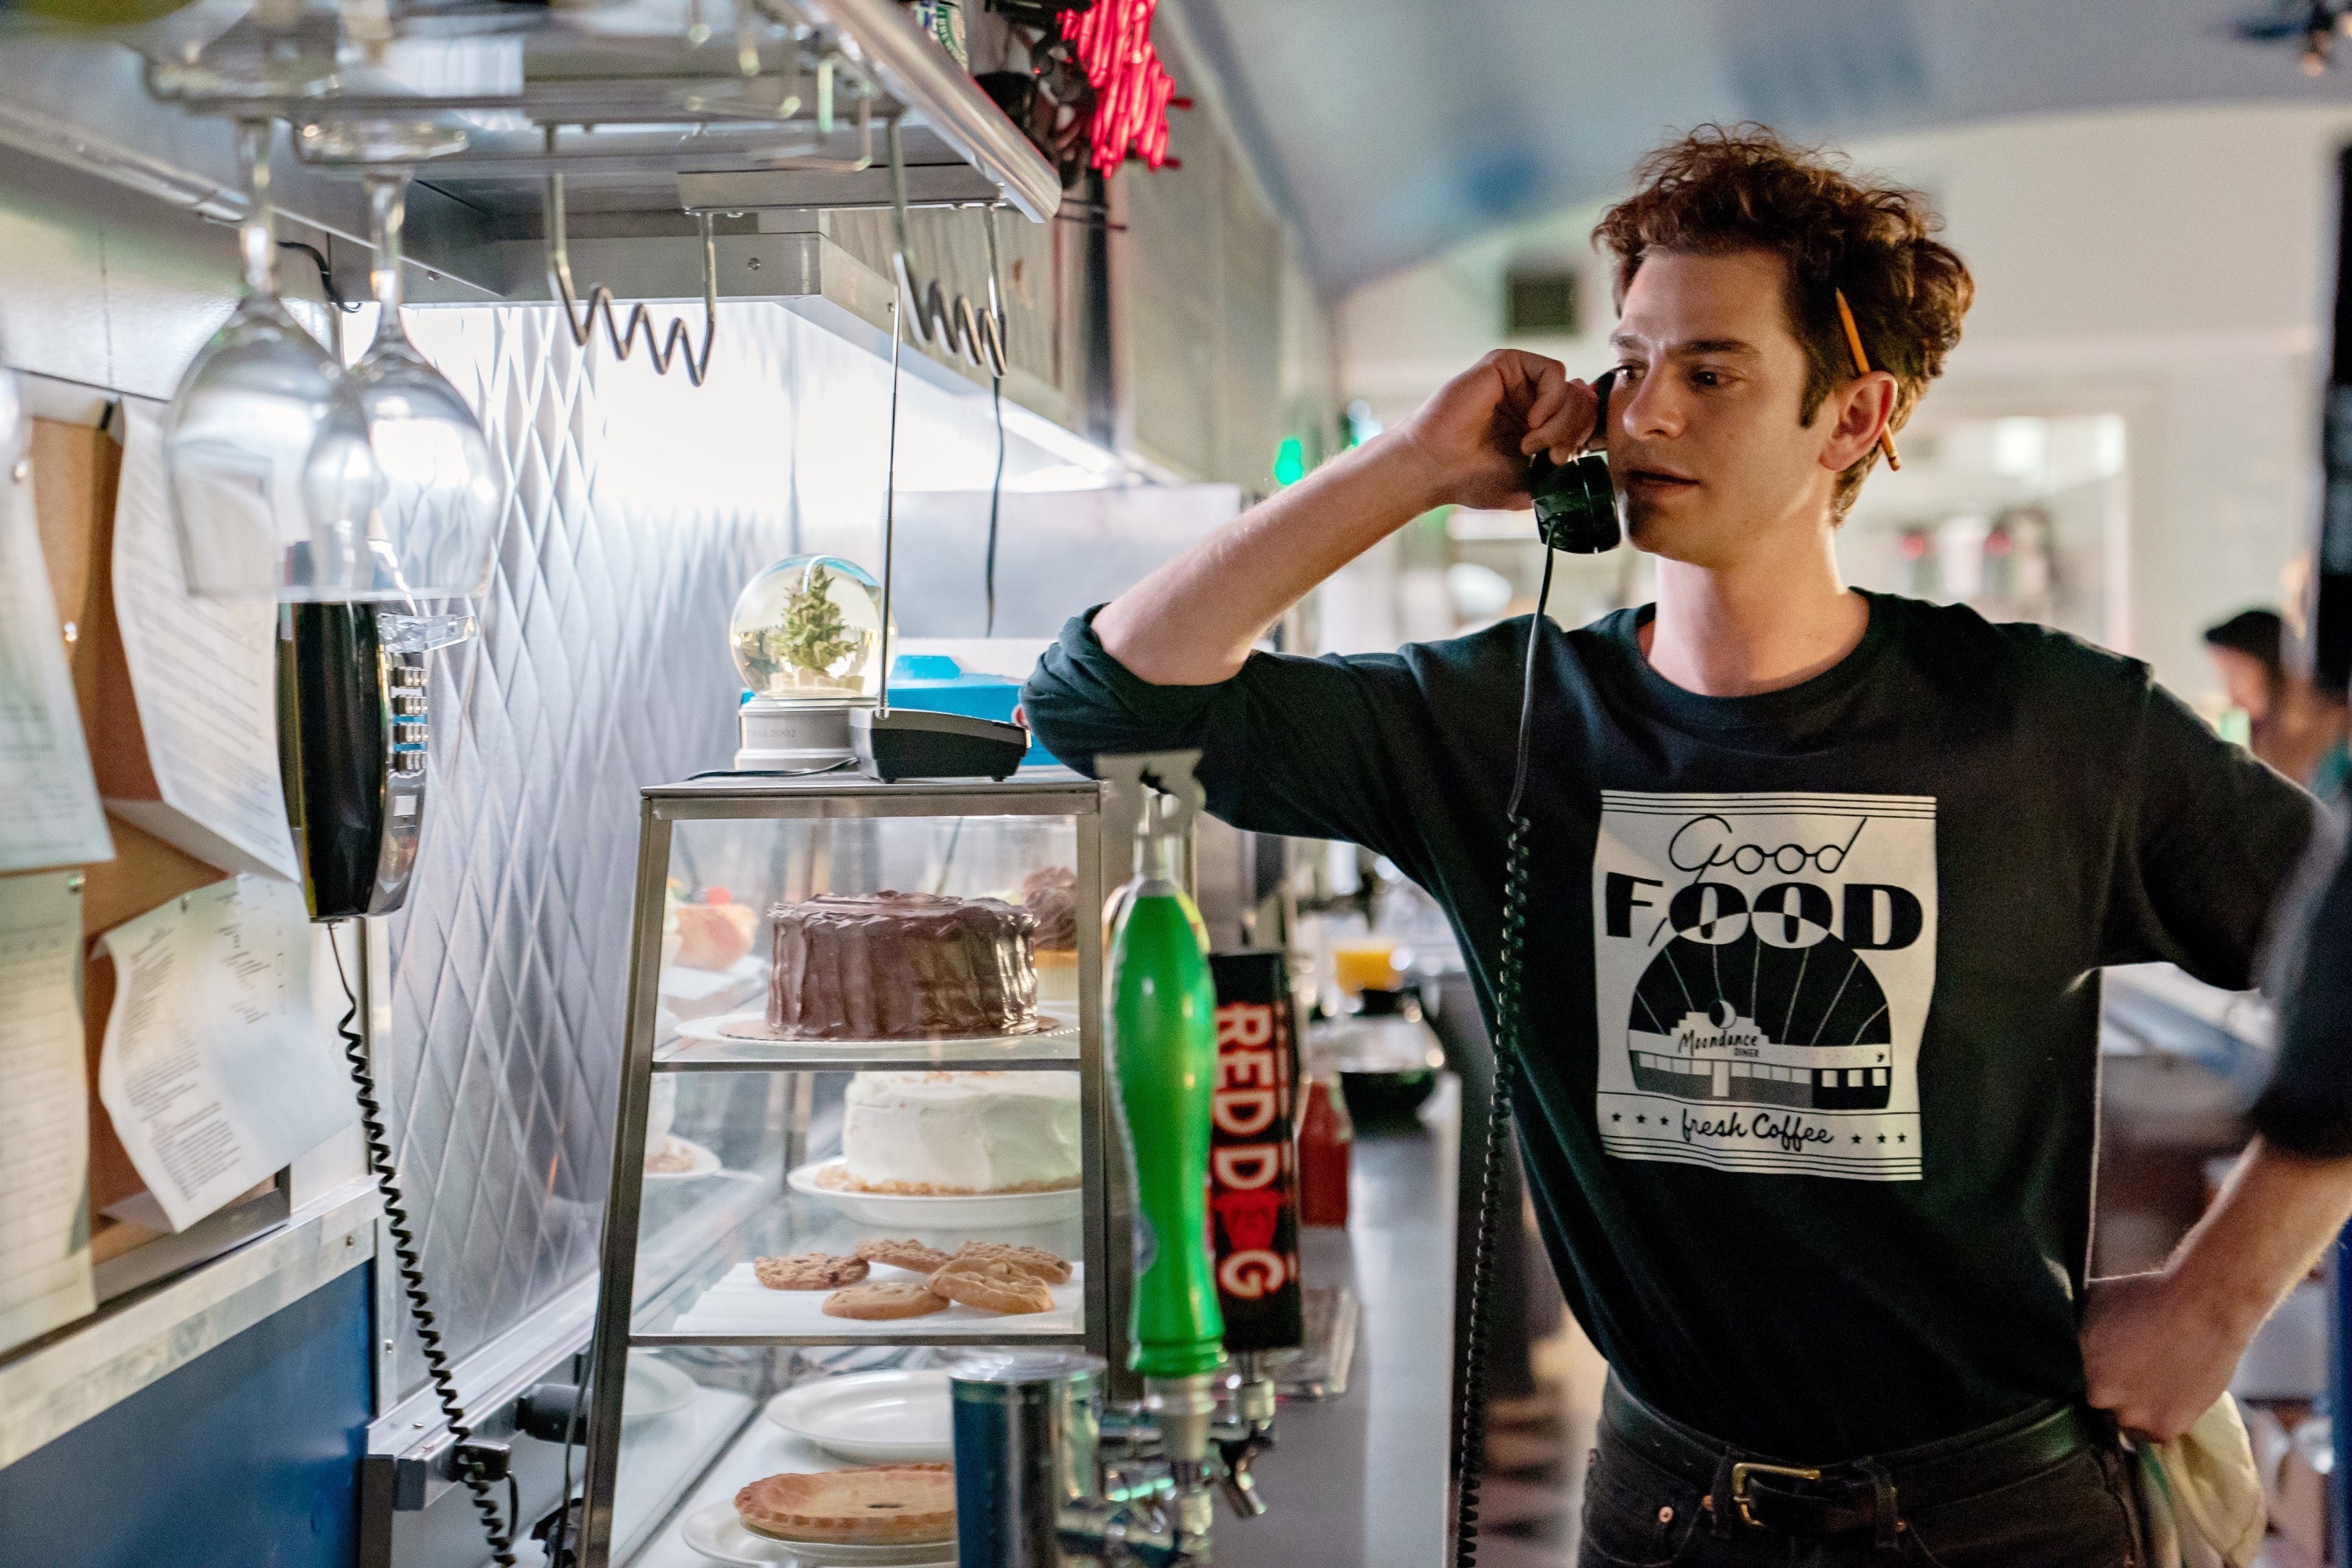 Andrew Garfield stands at a diner counter on the phone